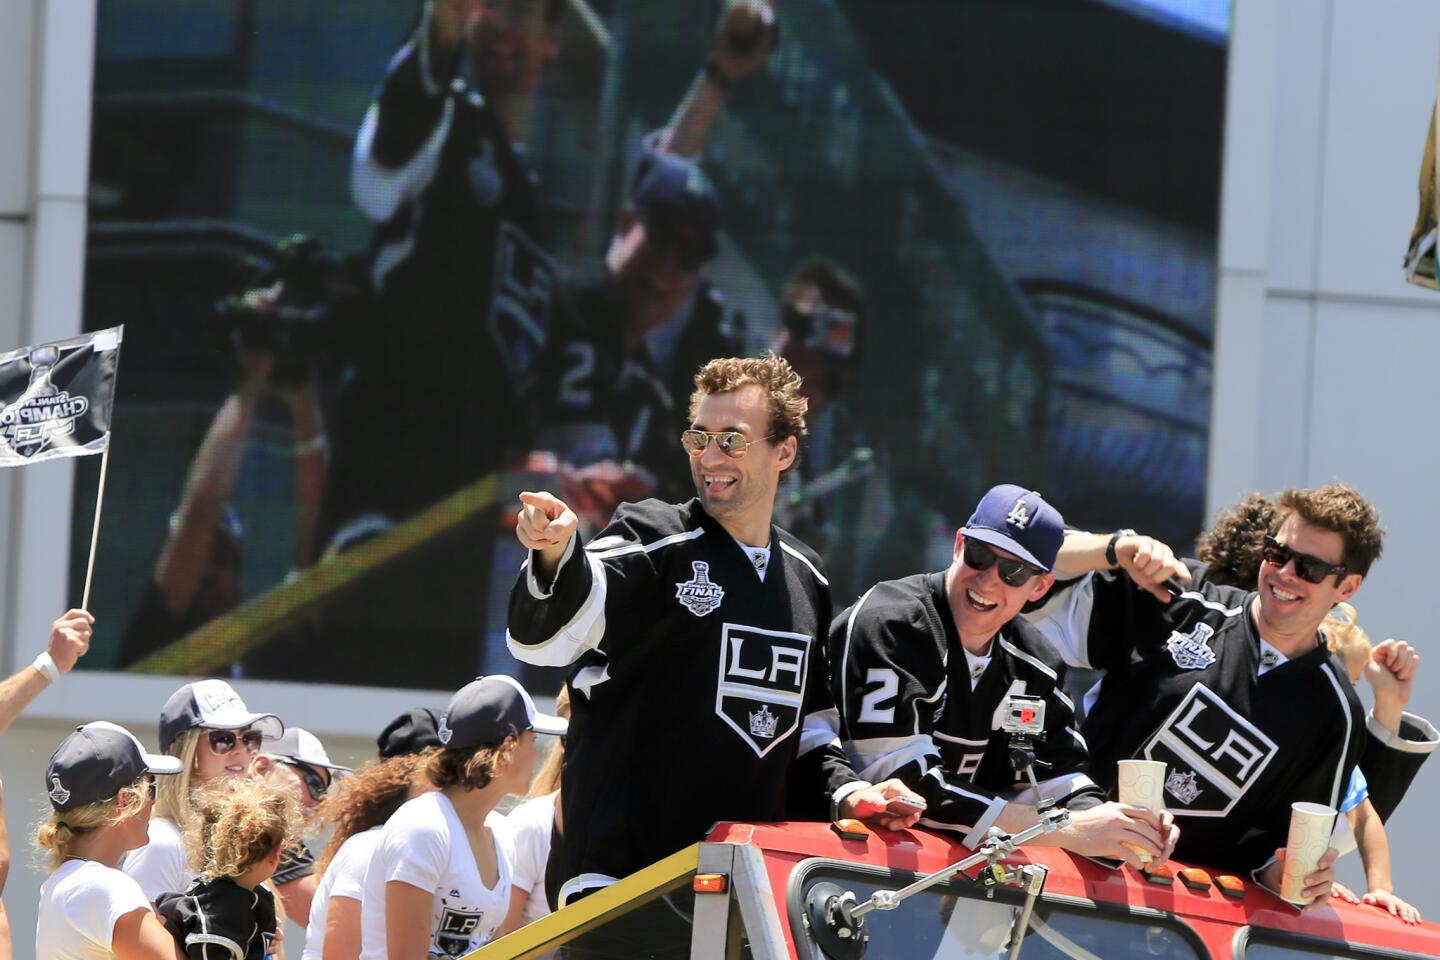 Go Metro to Los Angeles Kings Stanley Cup victory parade!